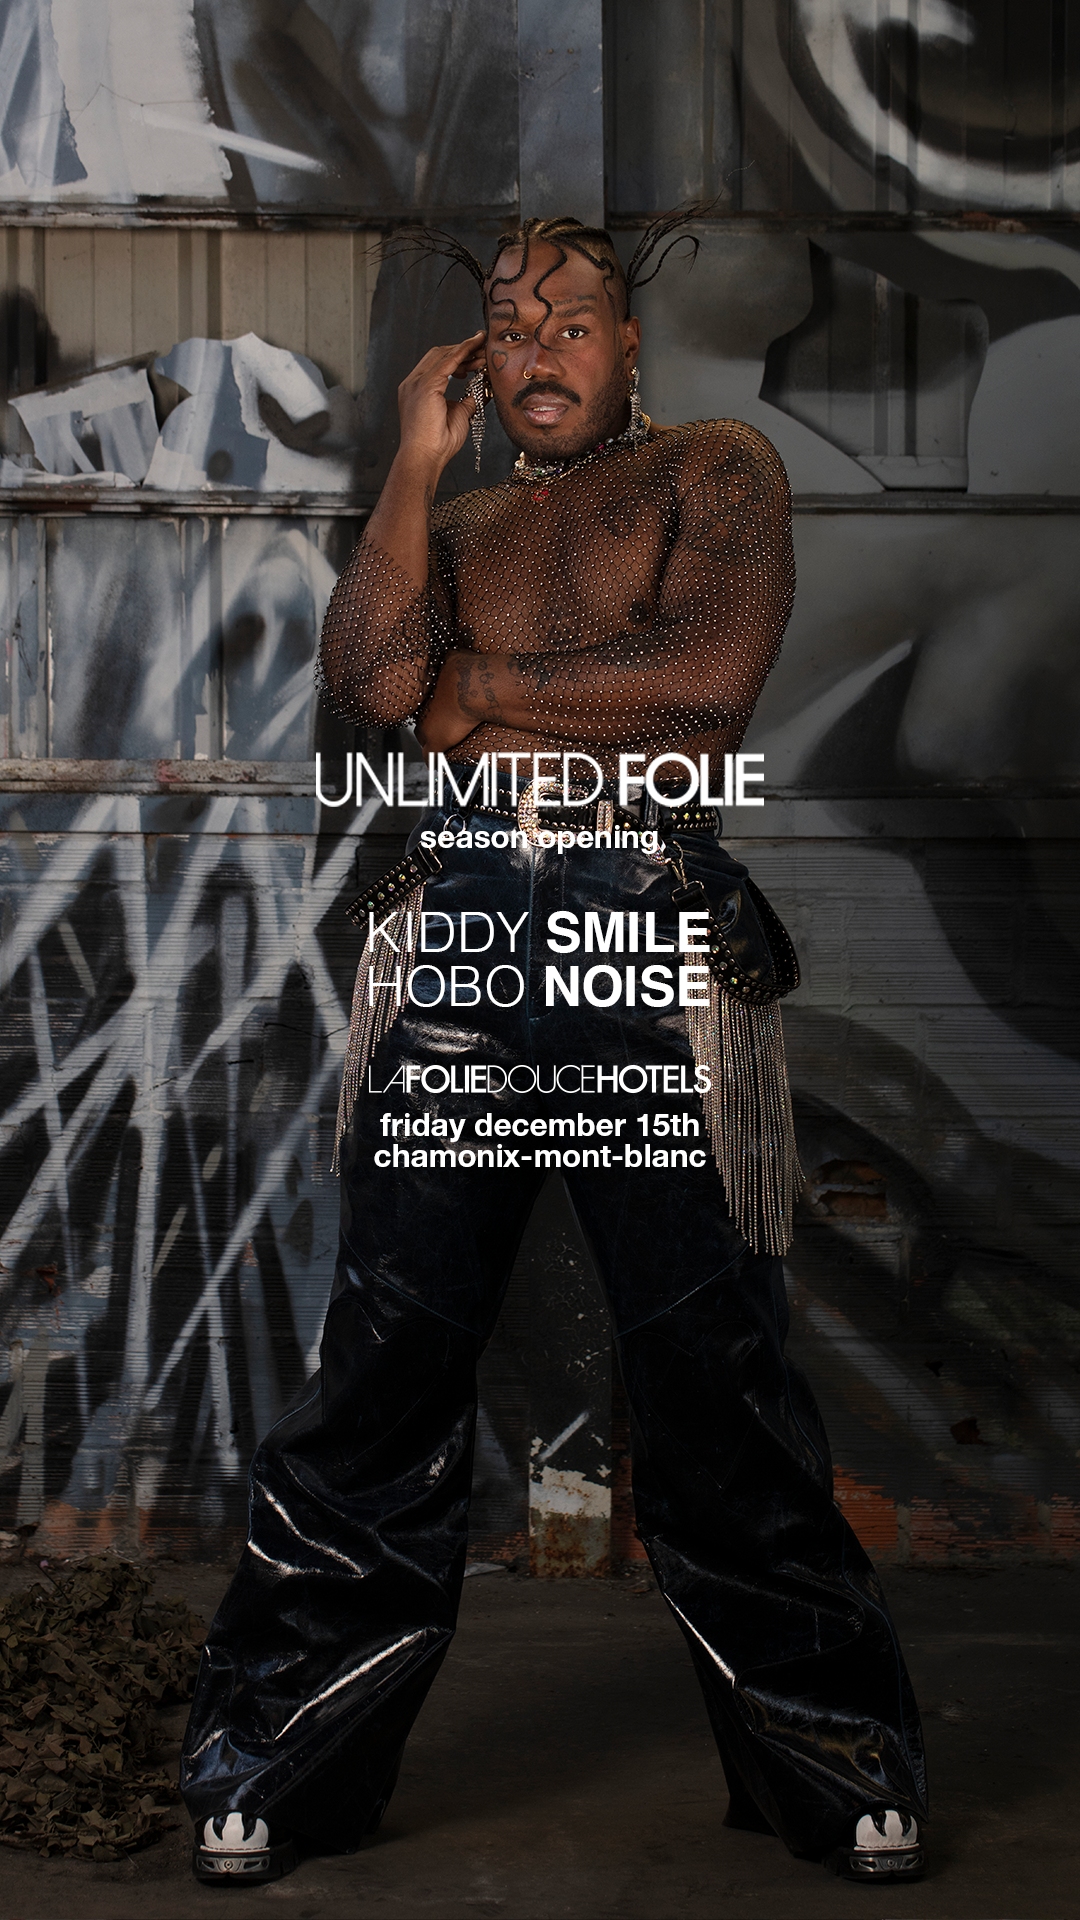 UNLIMITED FOLIE: Kiddy Smile. hobo noise - フライヤー裏